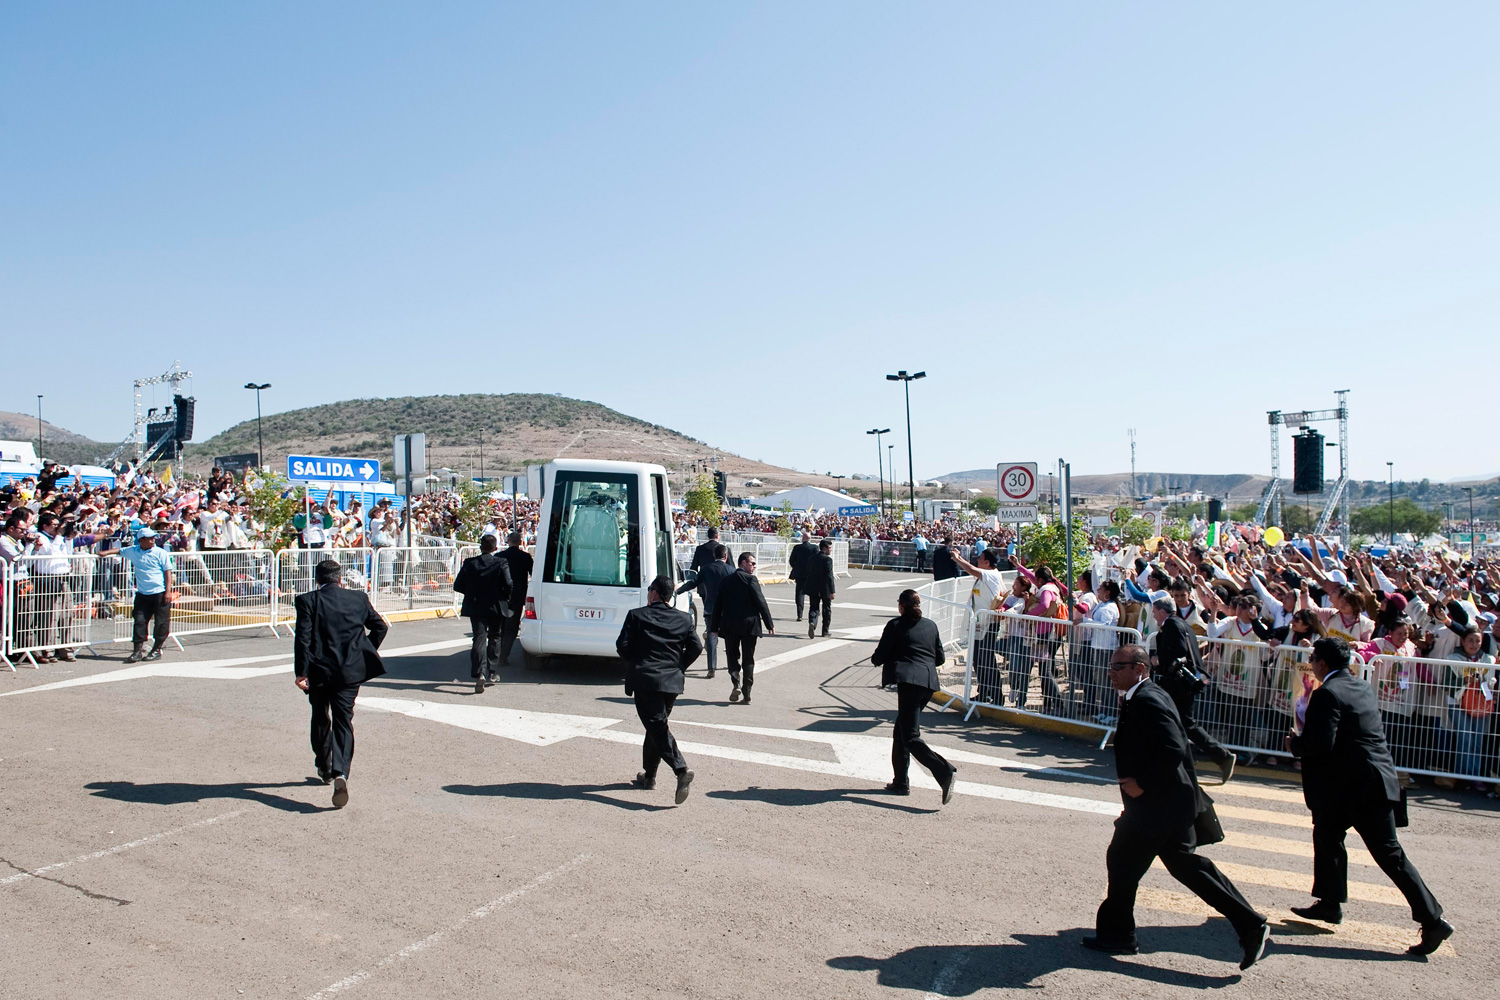 March 25, 2012. Pope Benedict XVI arrives on the popemobile at Bicentennial Park in Silao, Guanajuato State, Mexico, where he is to celebrate an open-air mass.